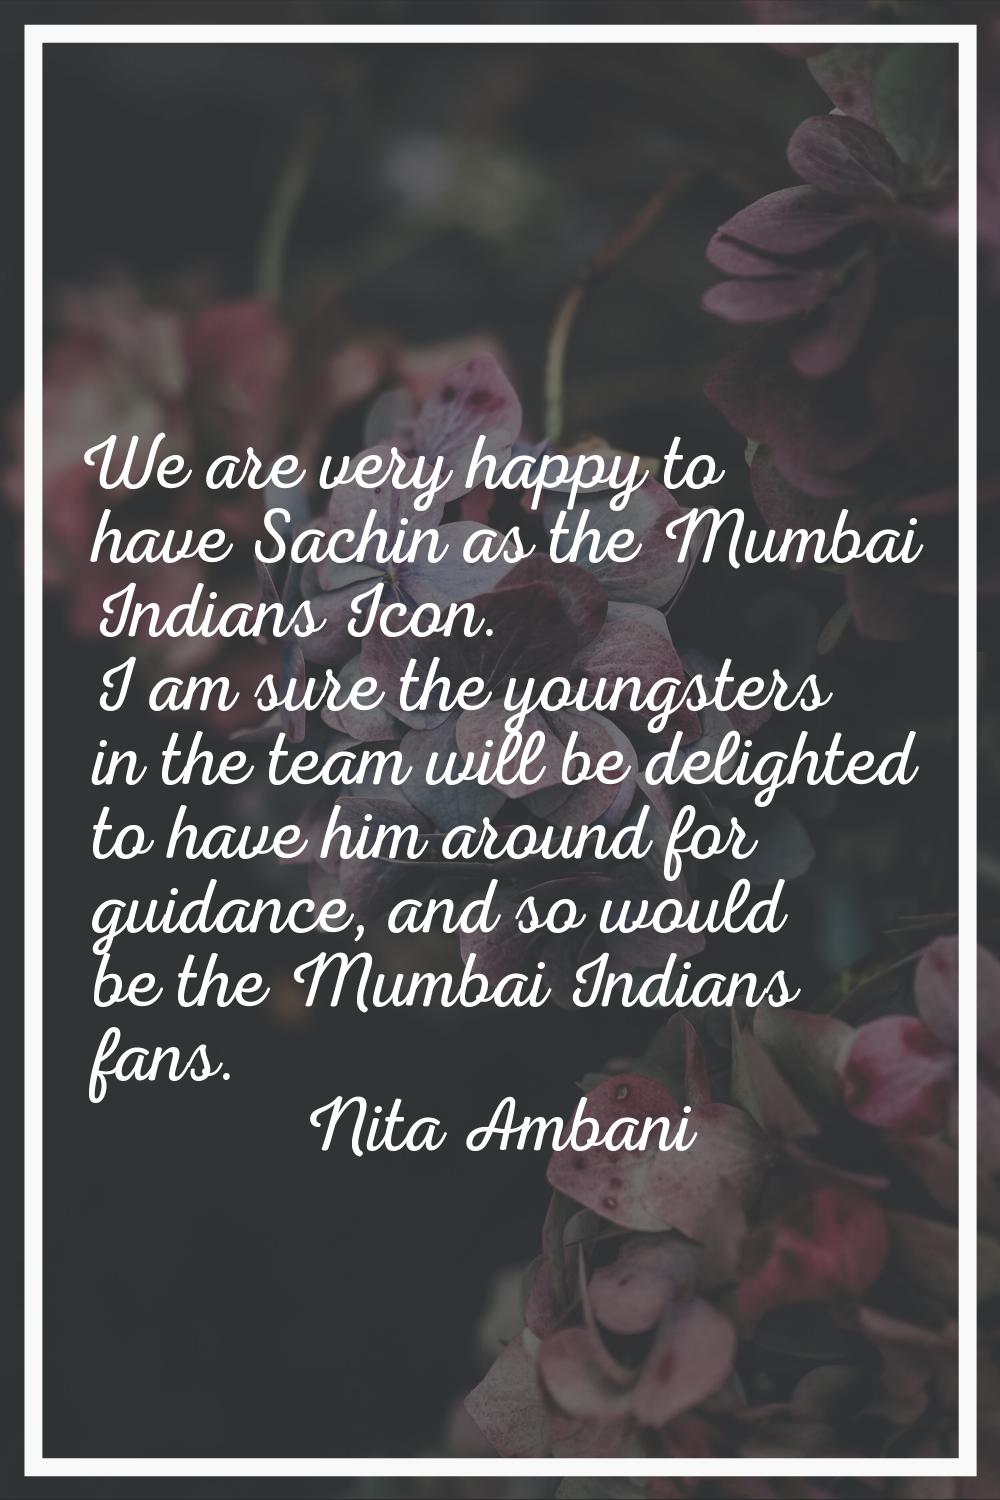 We are very happy to have Sachin as the Mumbai Indians Icon. I am sure the youngsters in the team w